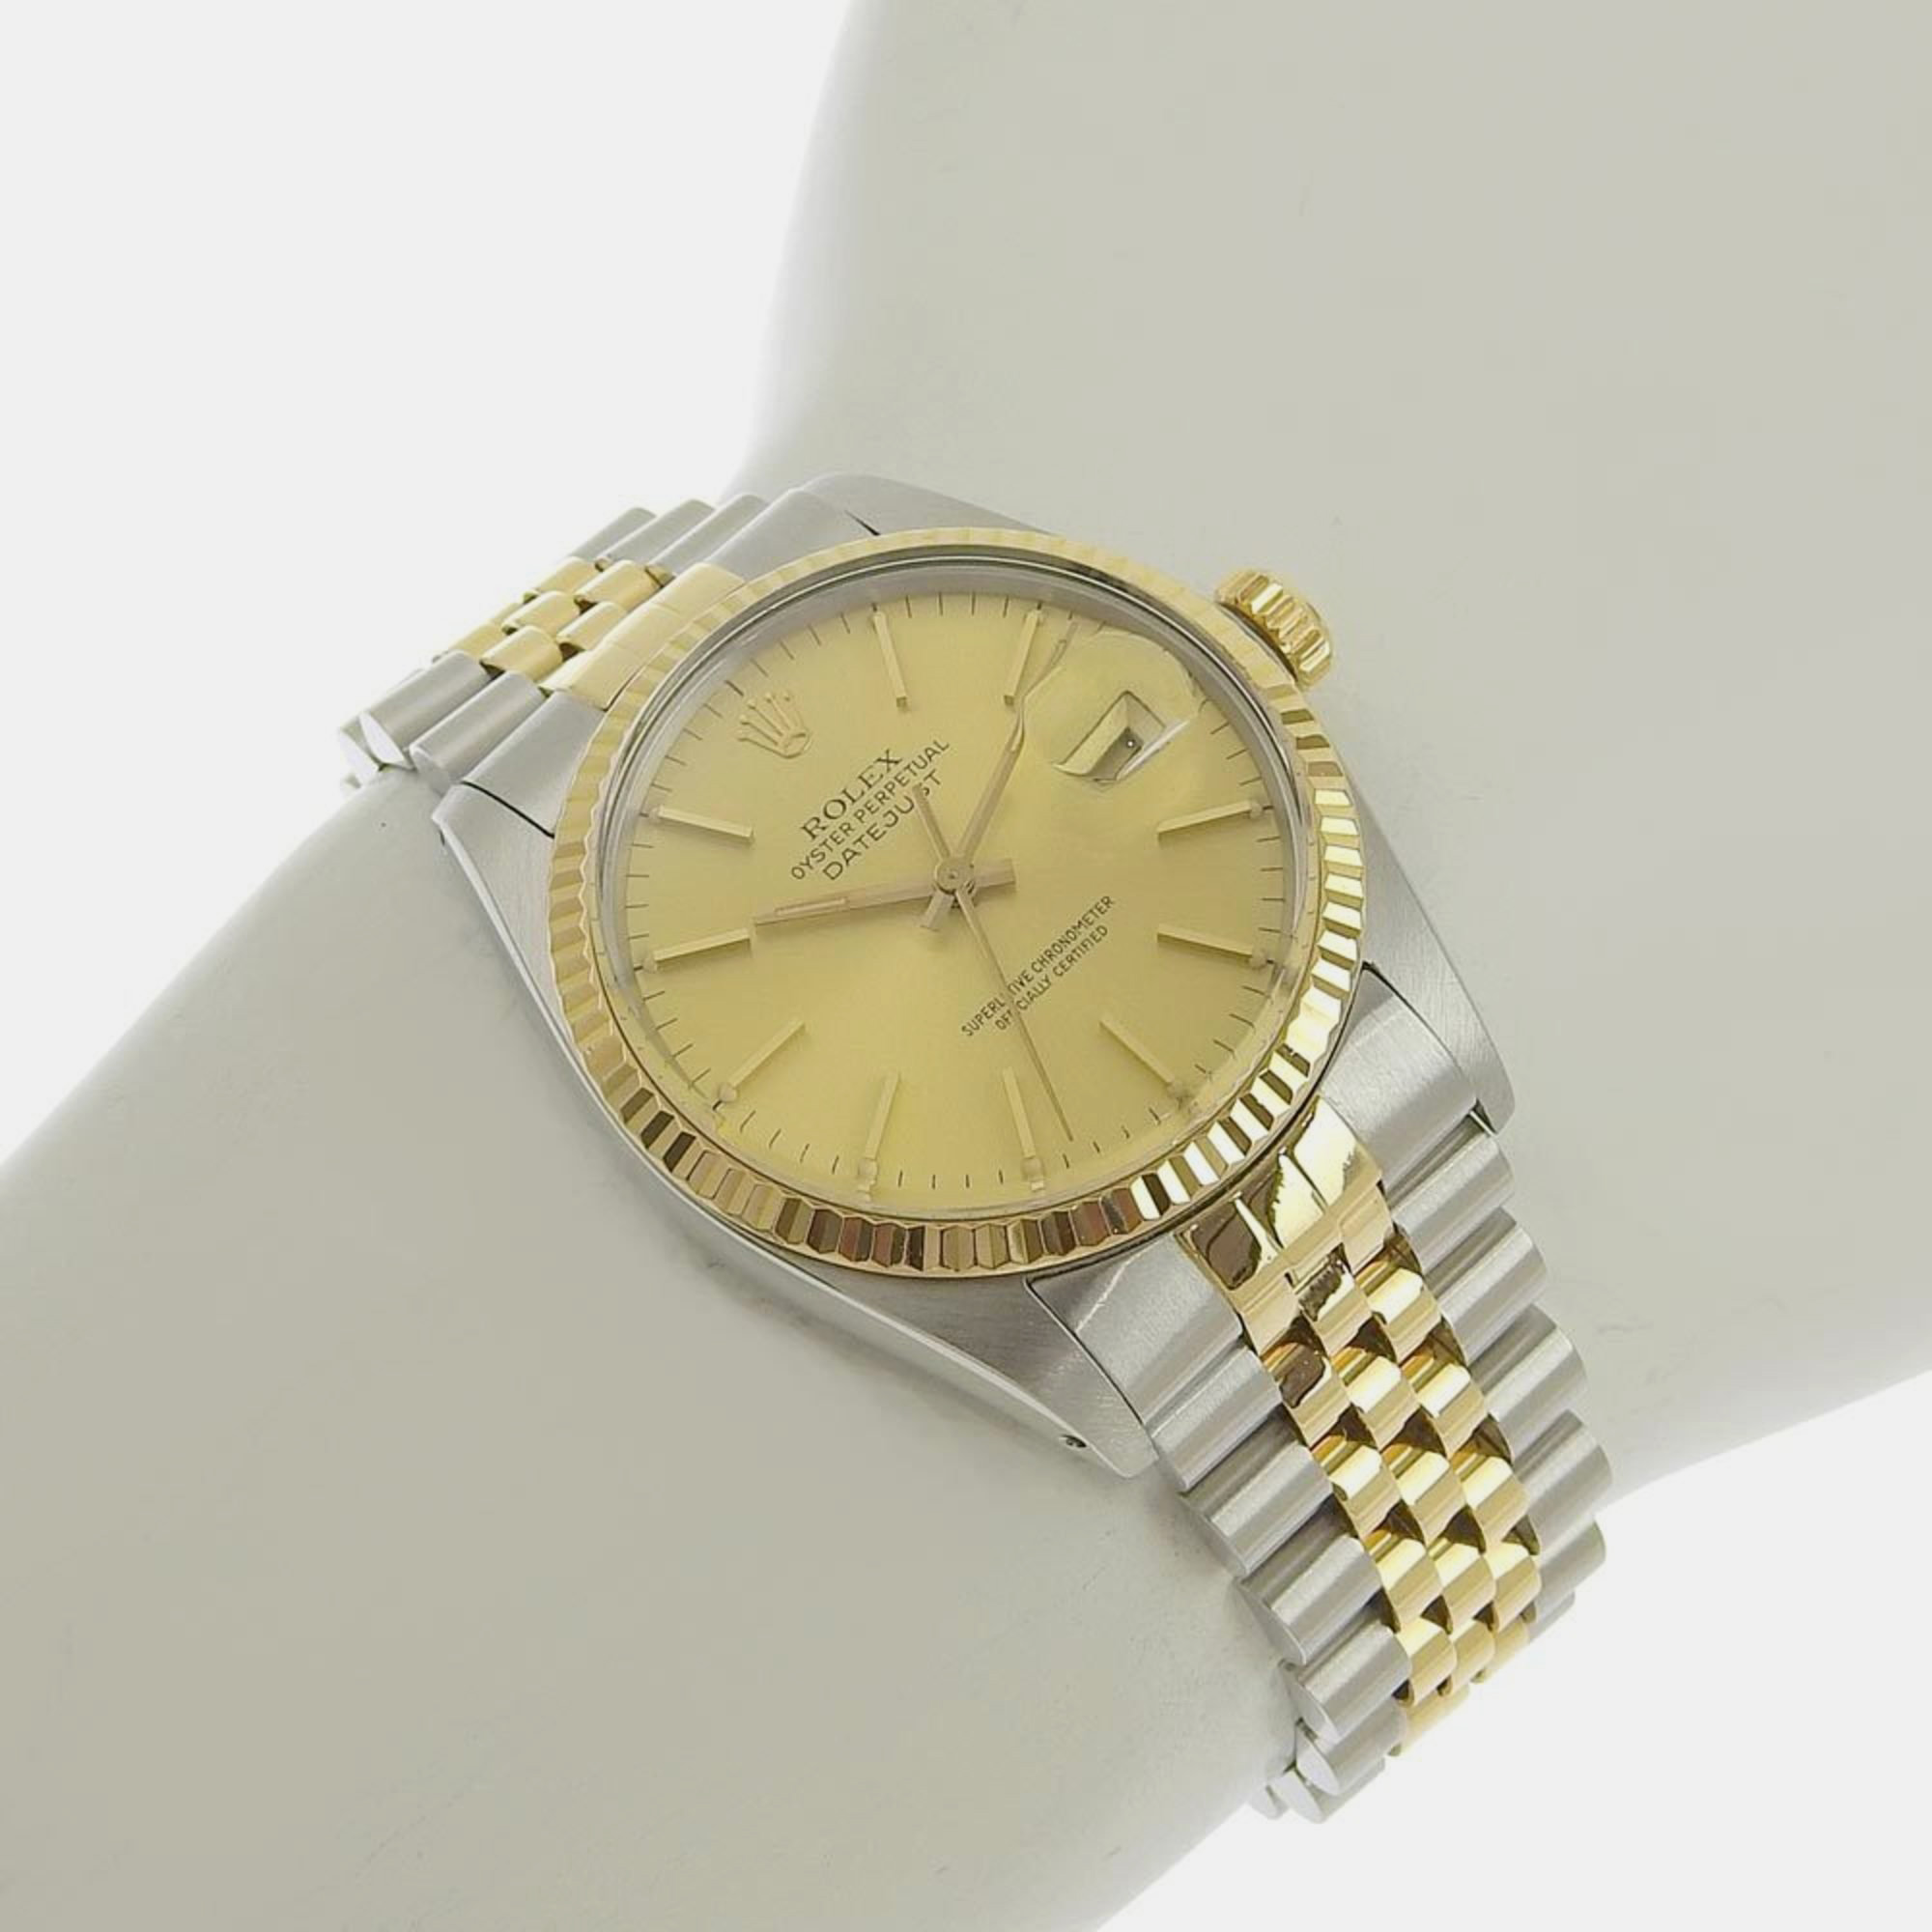 Rolex Champagne 18k Yellow Gold And Stainless Steel Datejust 16013 Automatic Men's Wristwatch 36 Mm